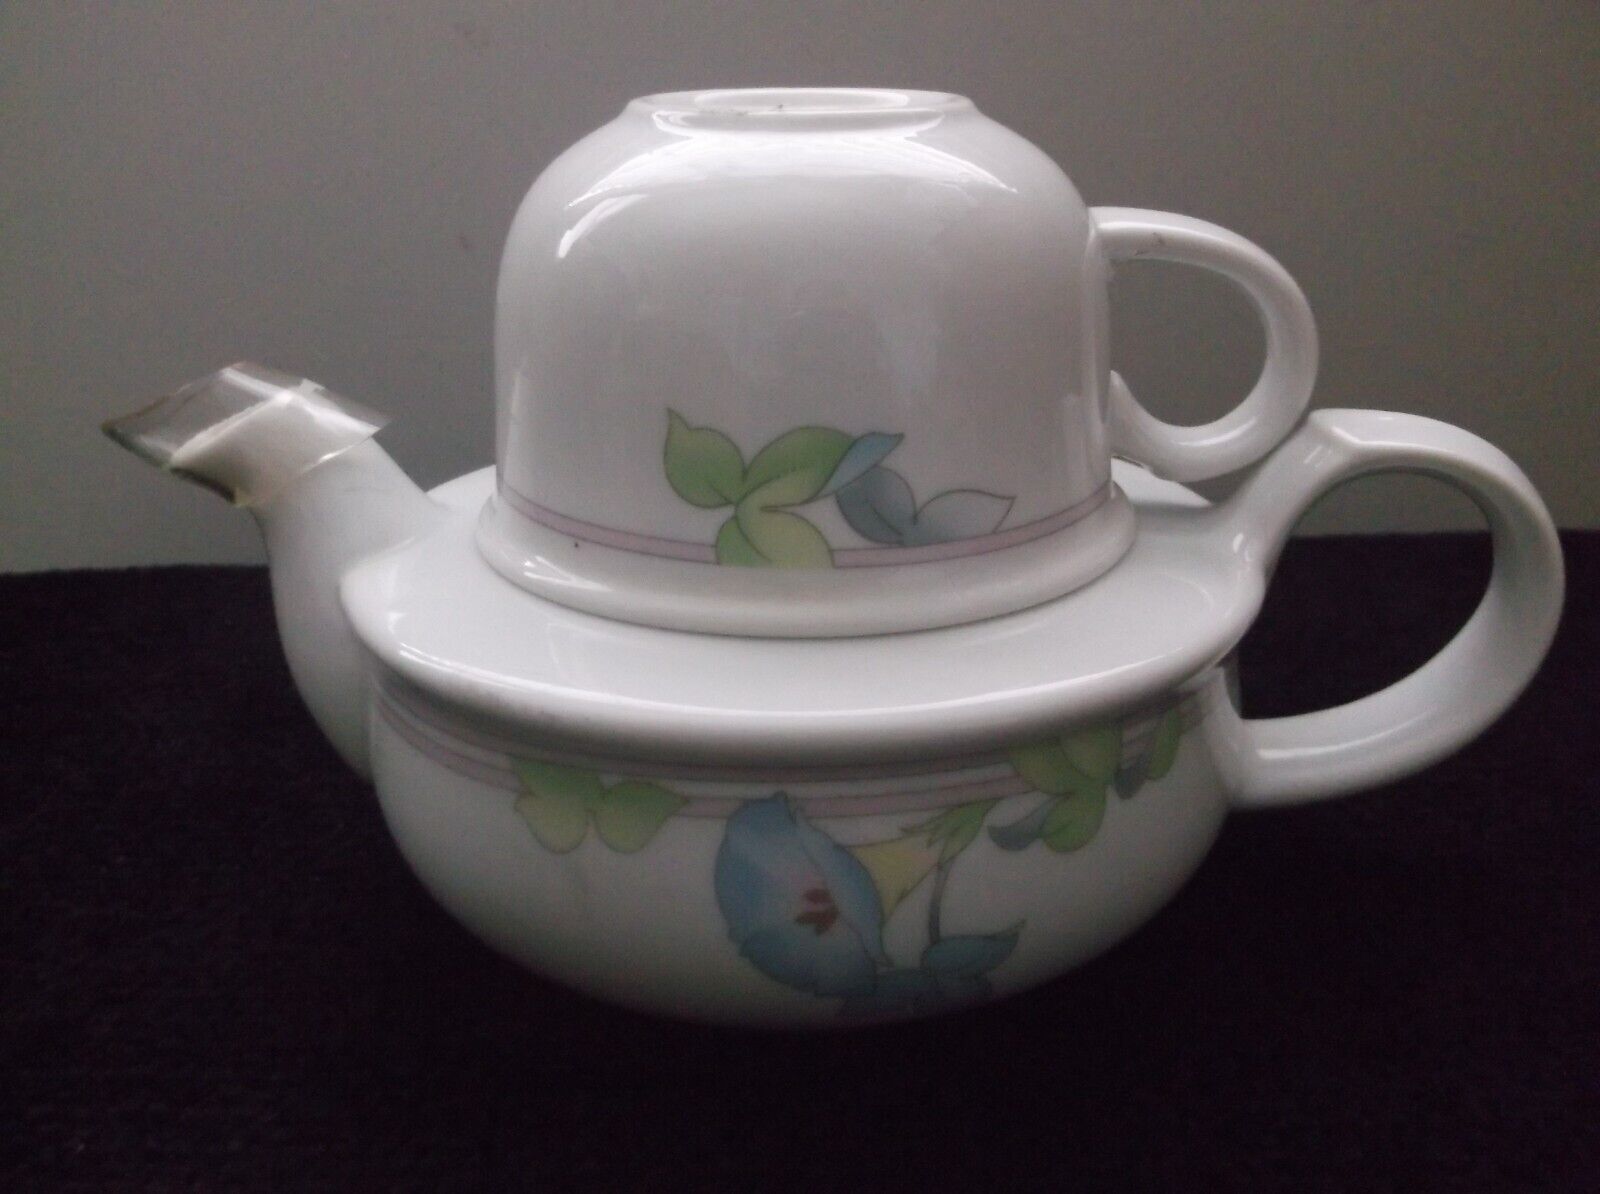 Vintage the Toscany Collection Japan Teapot & Cup set.